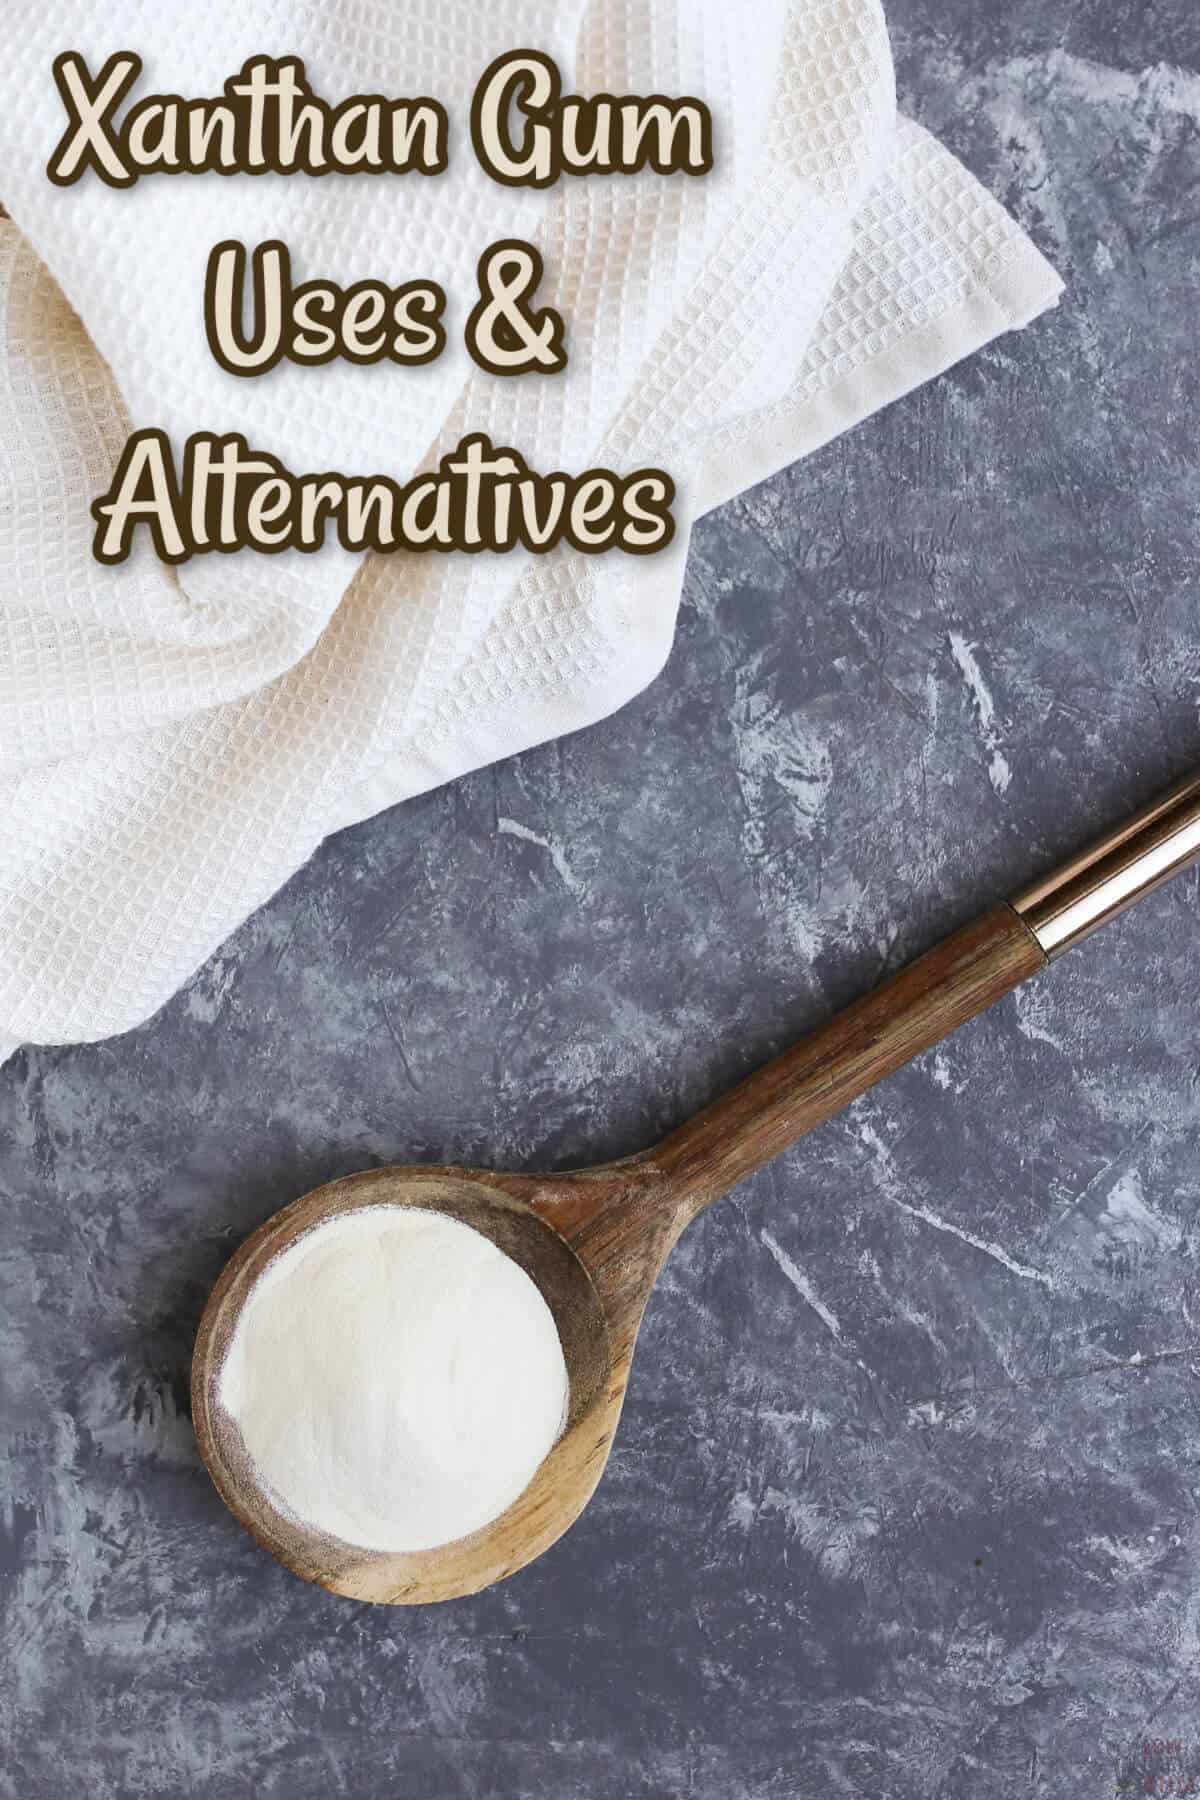 xanthan gum uses alternatives cover image